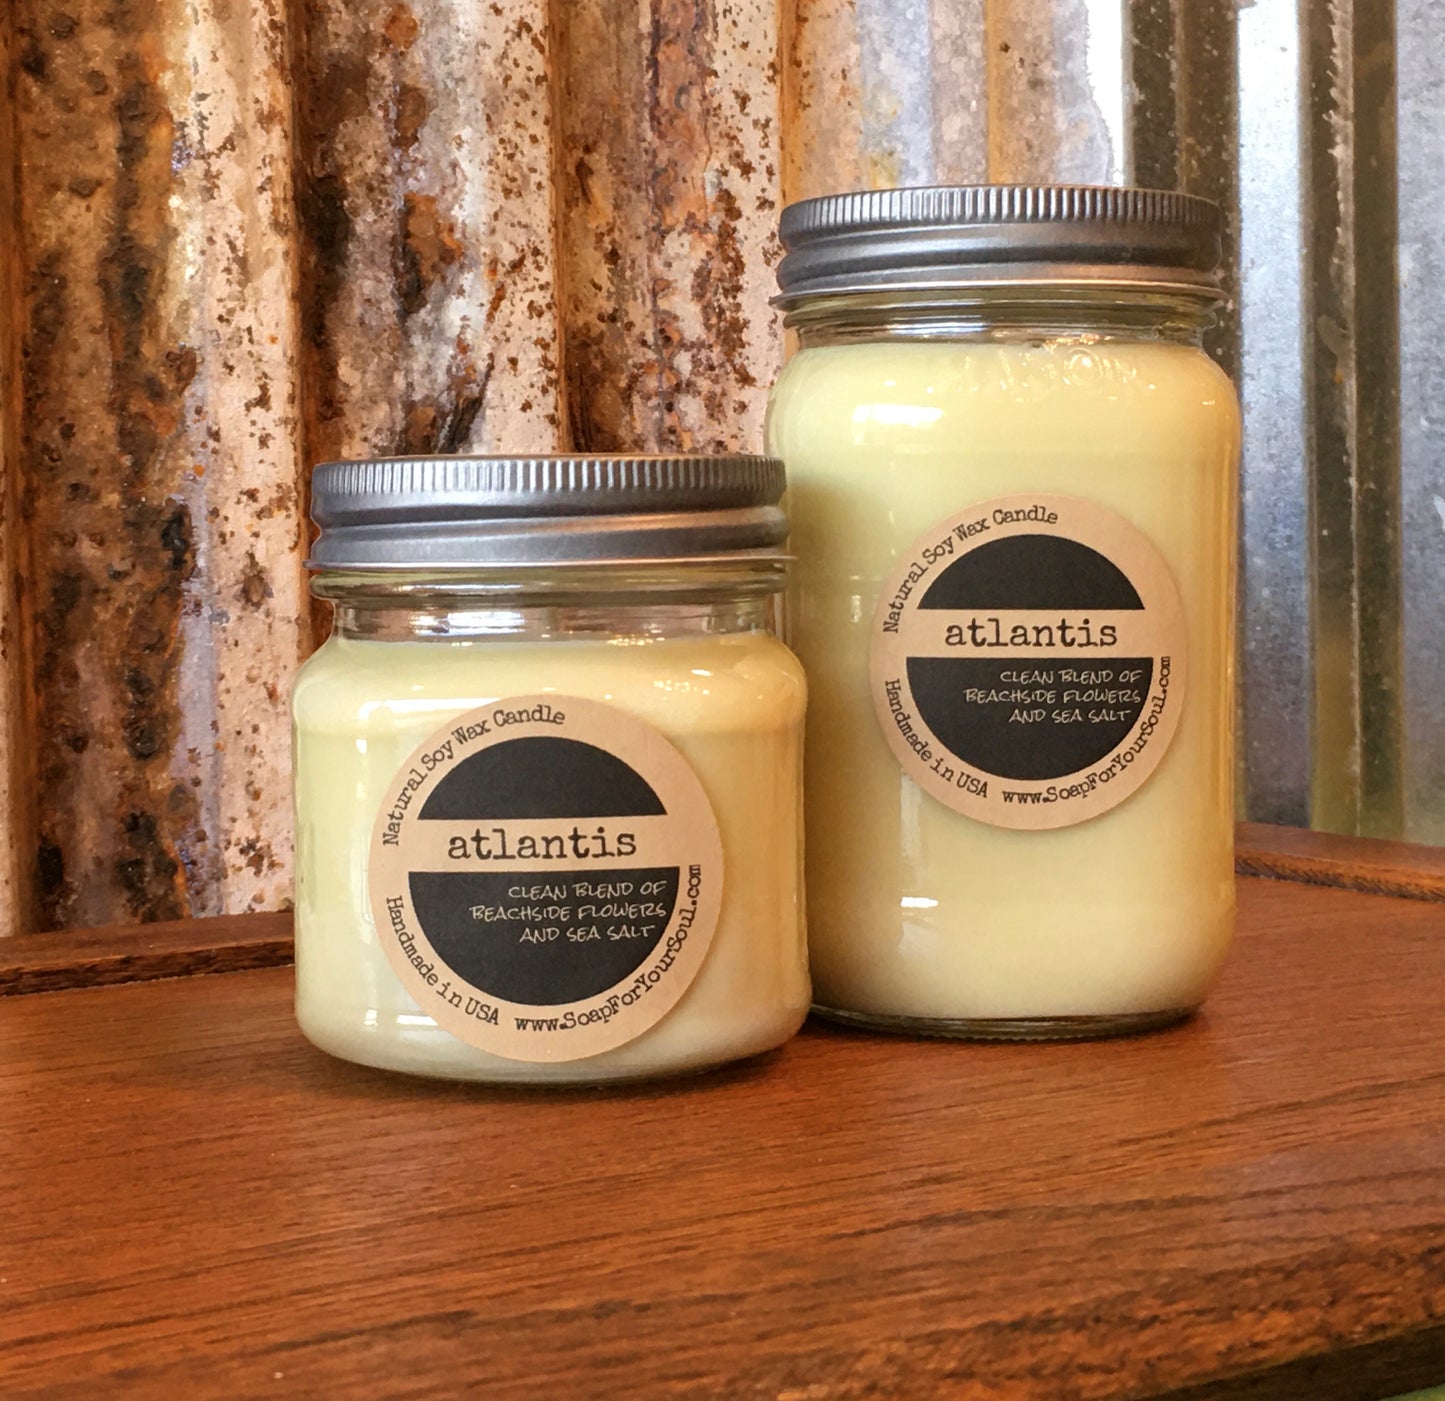 Atlantis scented Soy Candle